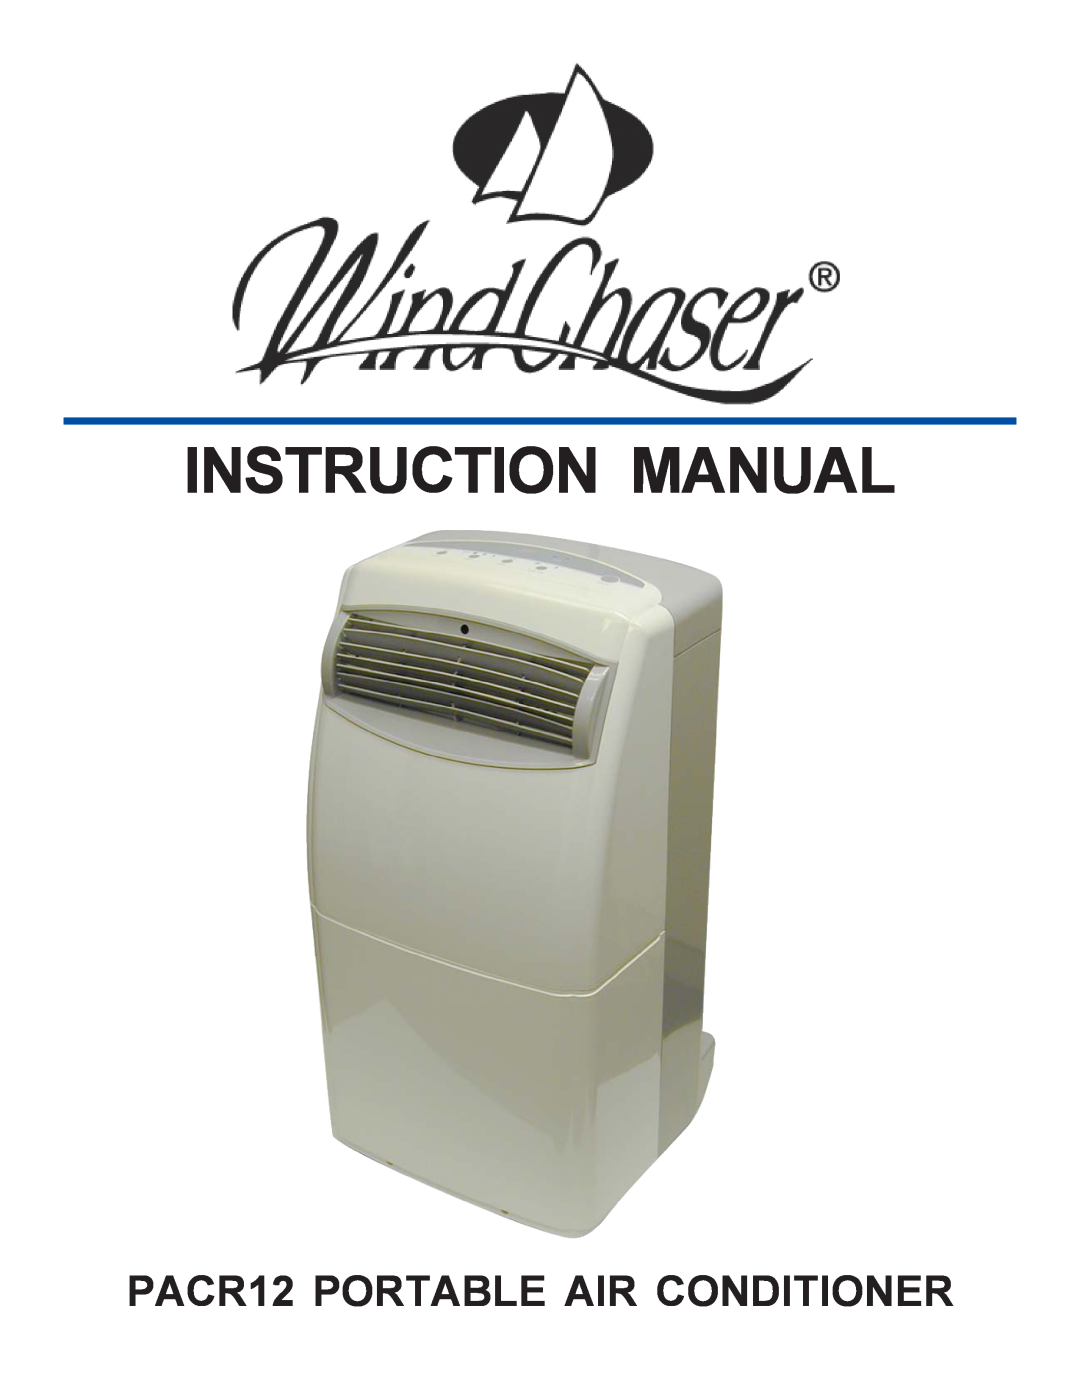 WindChaser Products instruction manual PACR12 PORTABLE AIR CONDITIONER 